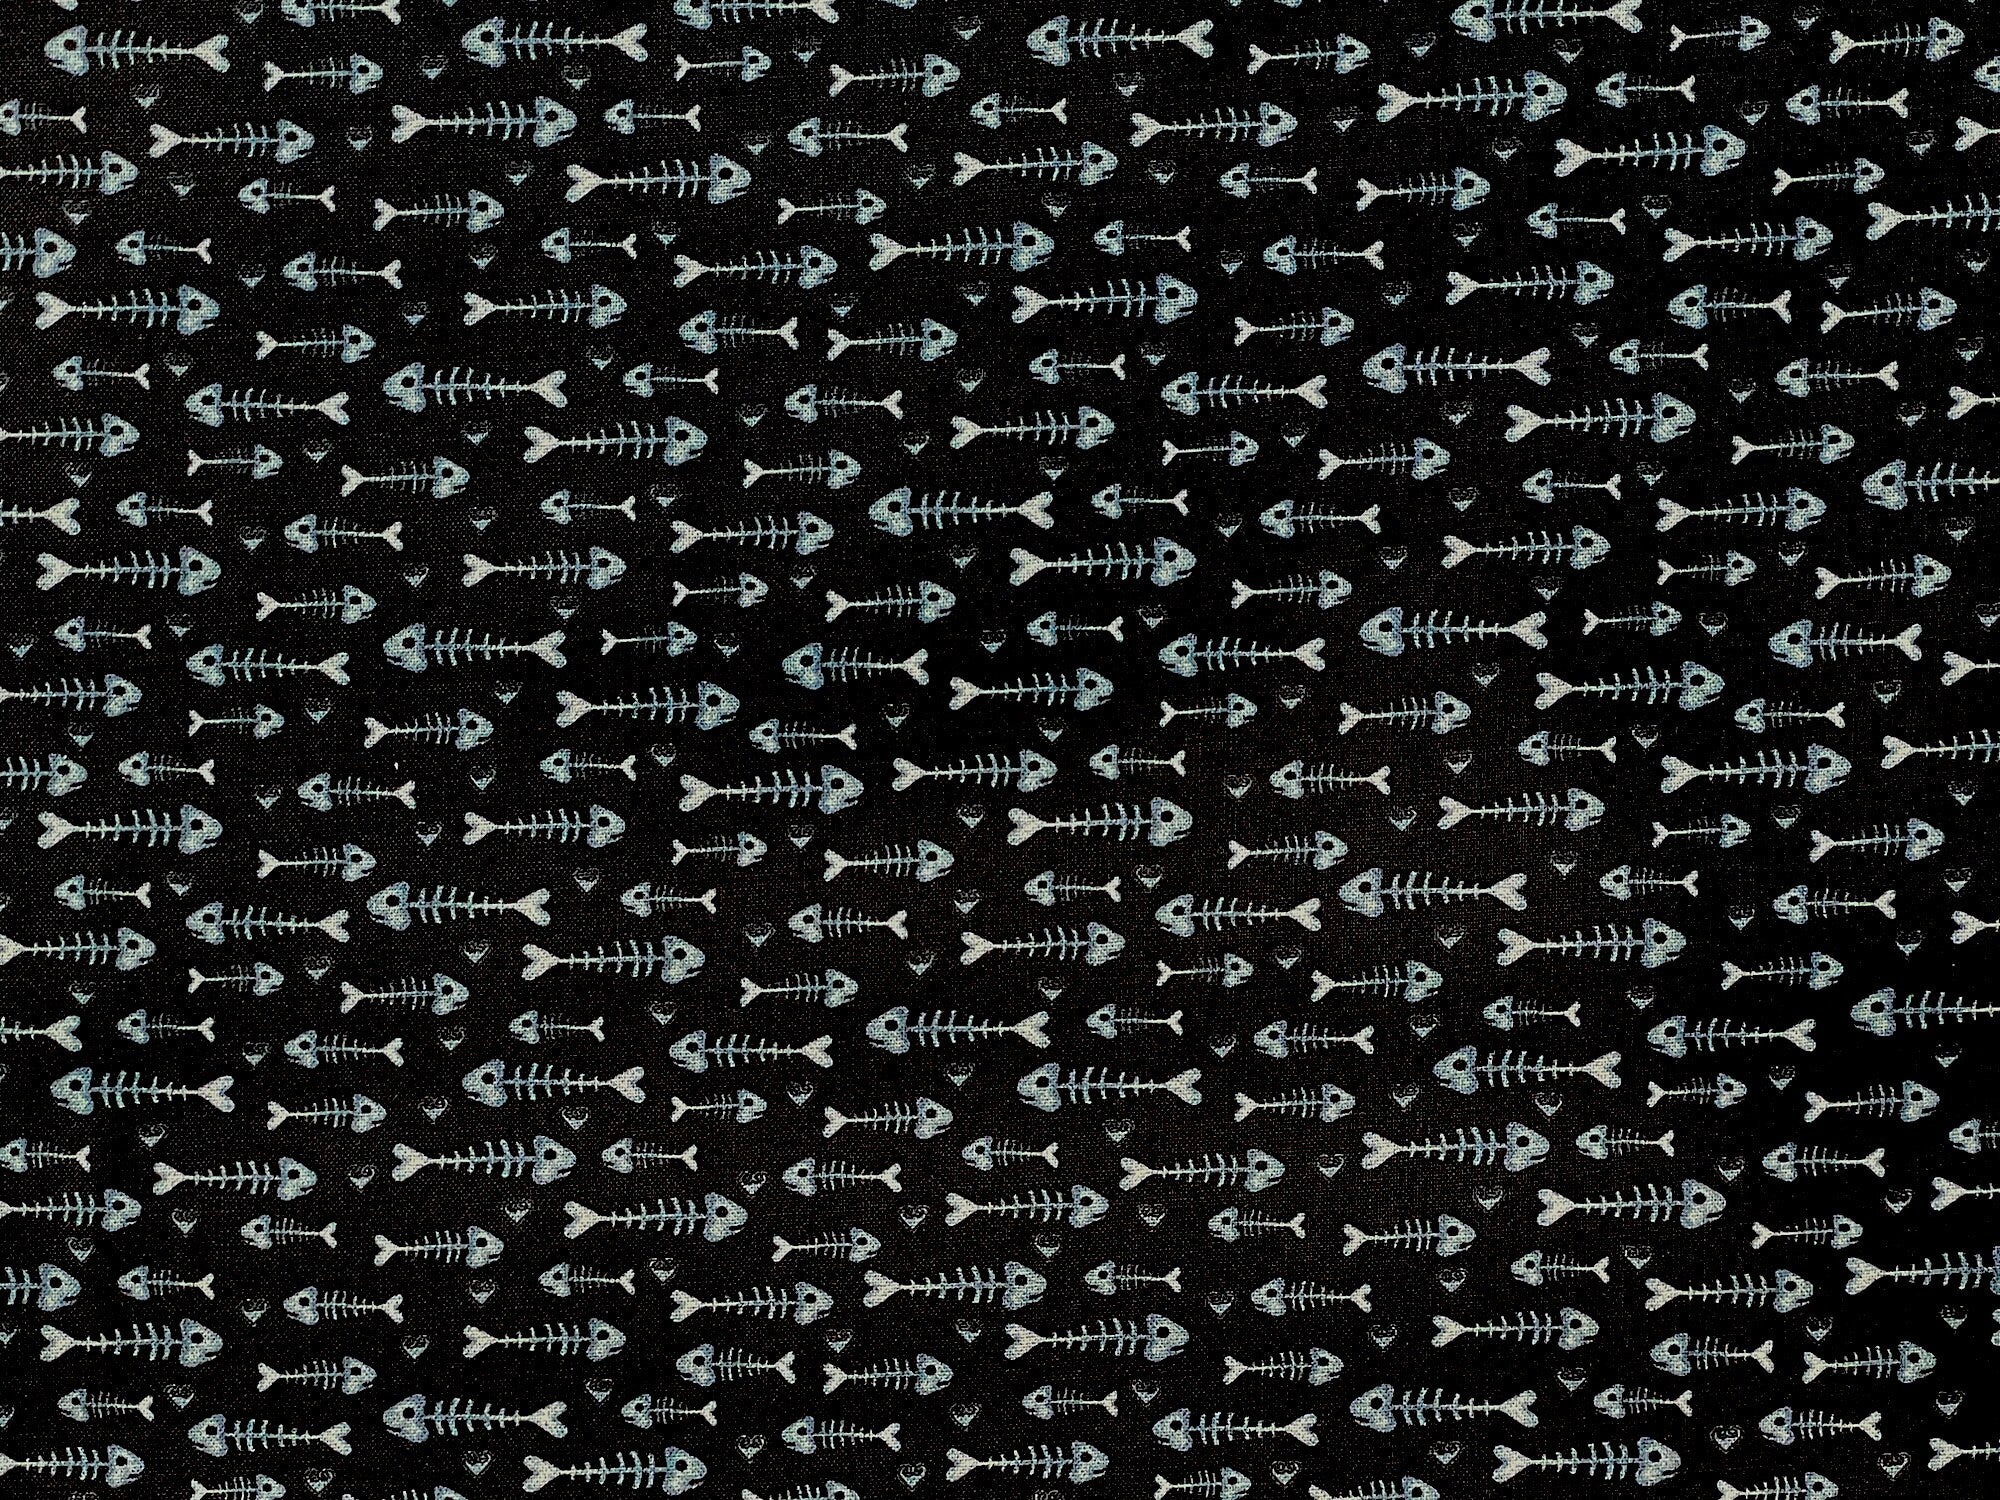 This black fabric is covered with fish bones. This fabric is part of the Kitty City collection by Andi Metz.